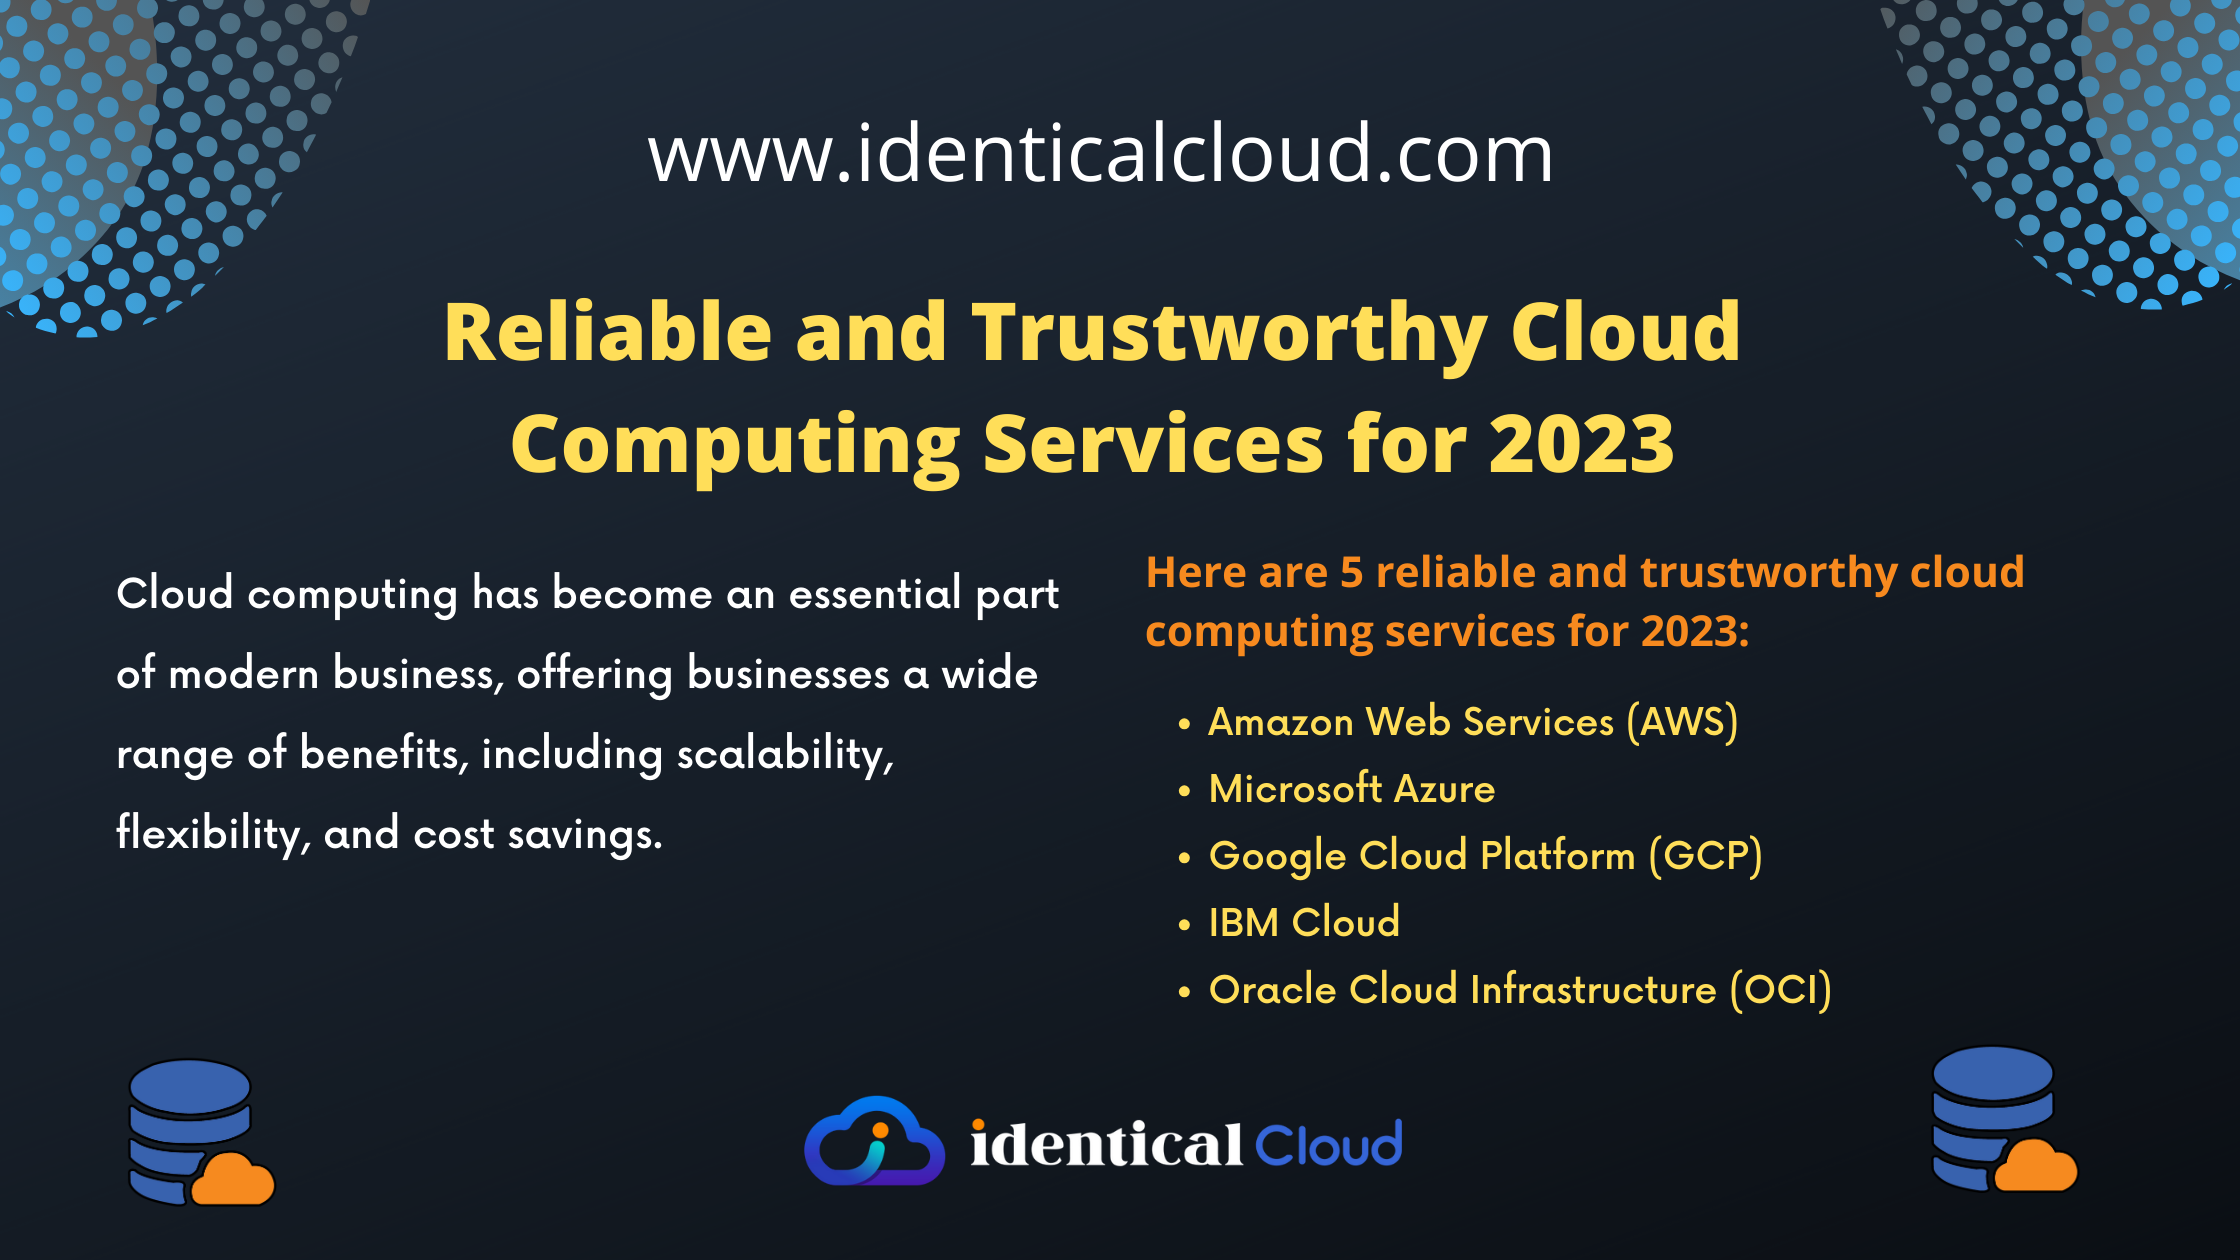 Reliable and Trustworthy Cloud Computing Services for 2023 - identicalcloud.com